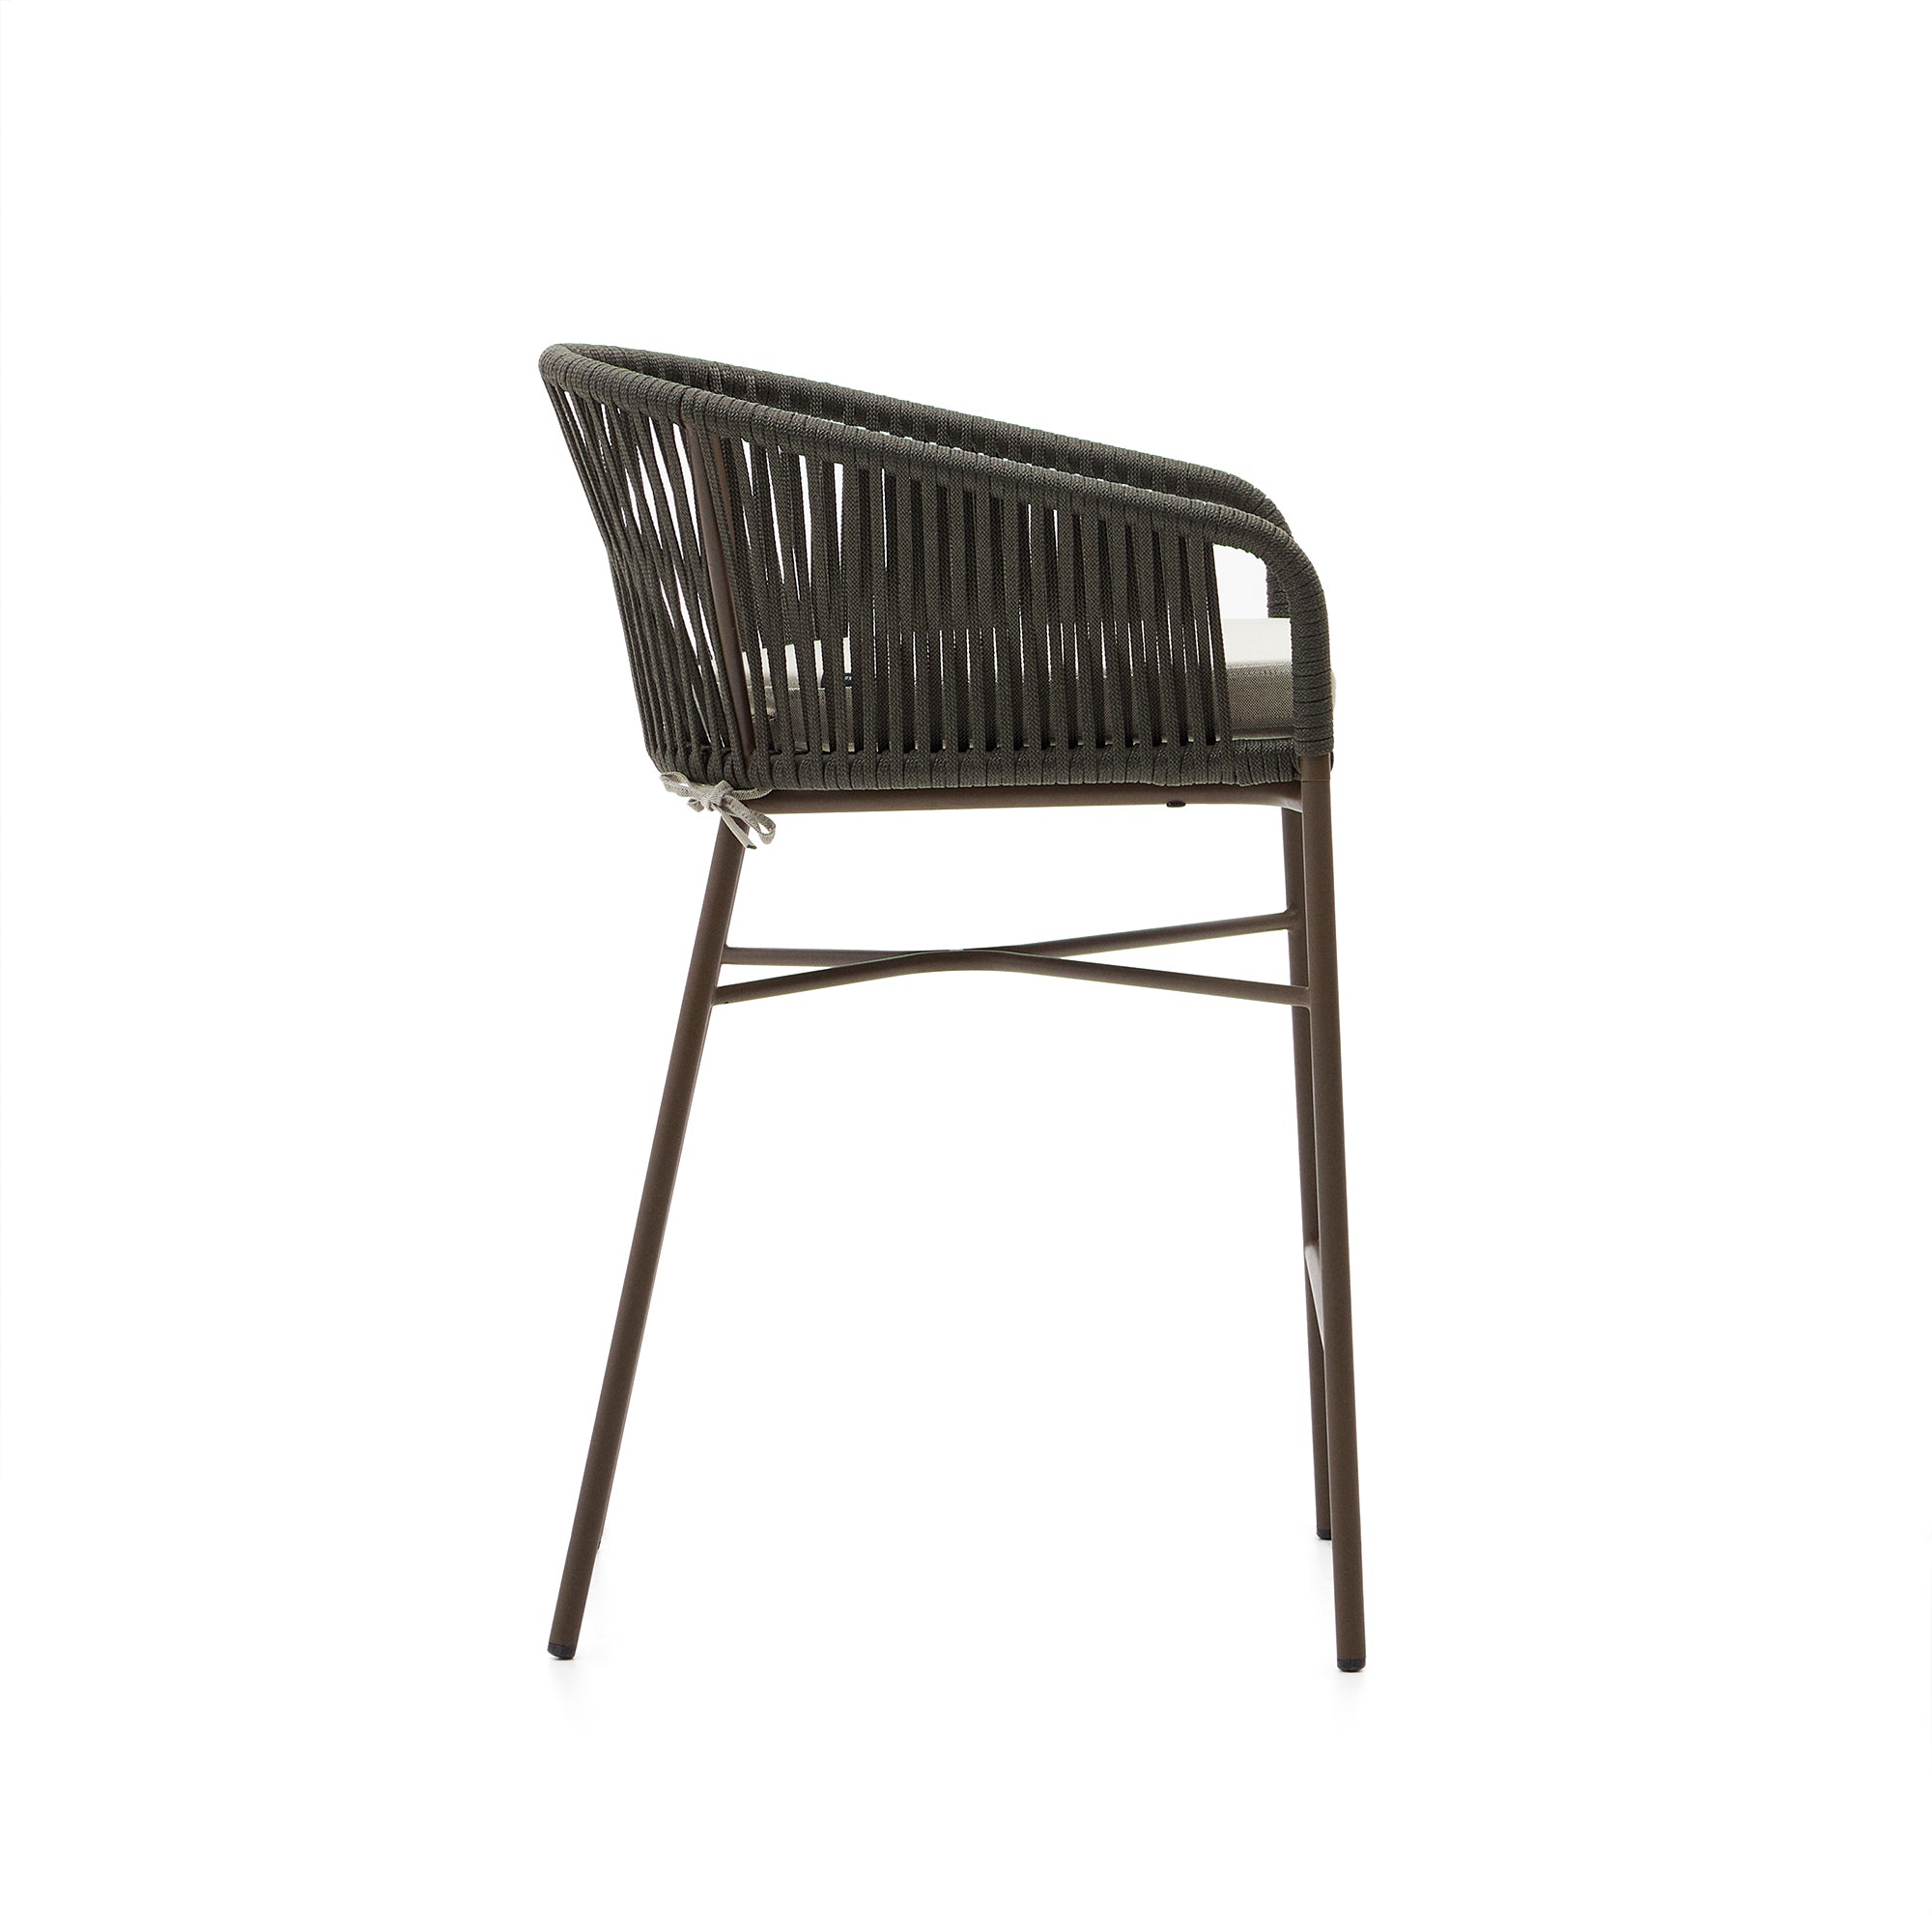 Yanet stool made from green cord and galvanised steel, height 65 cm